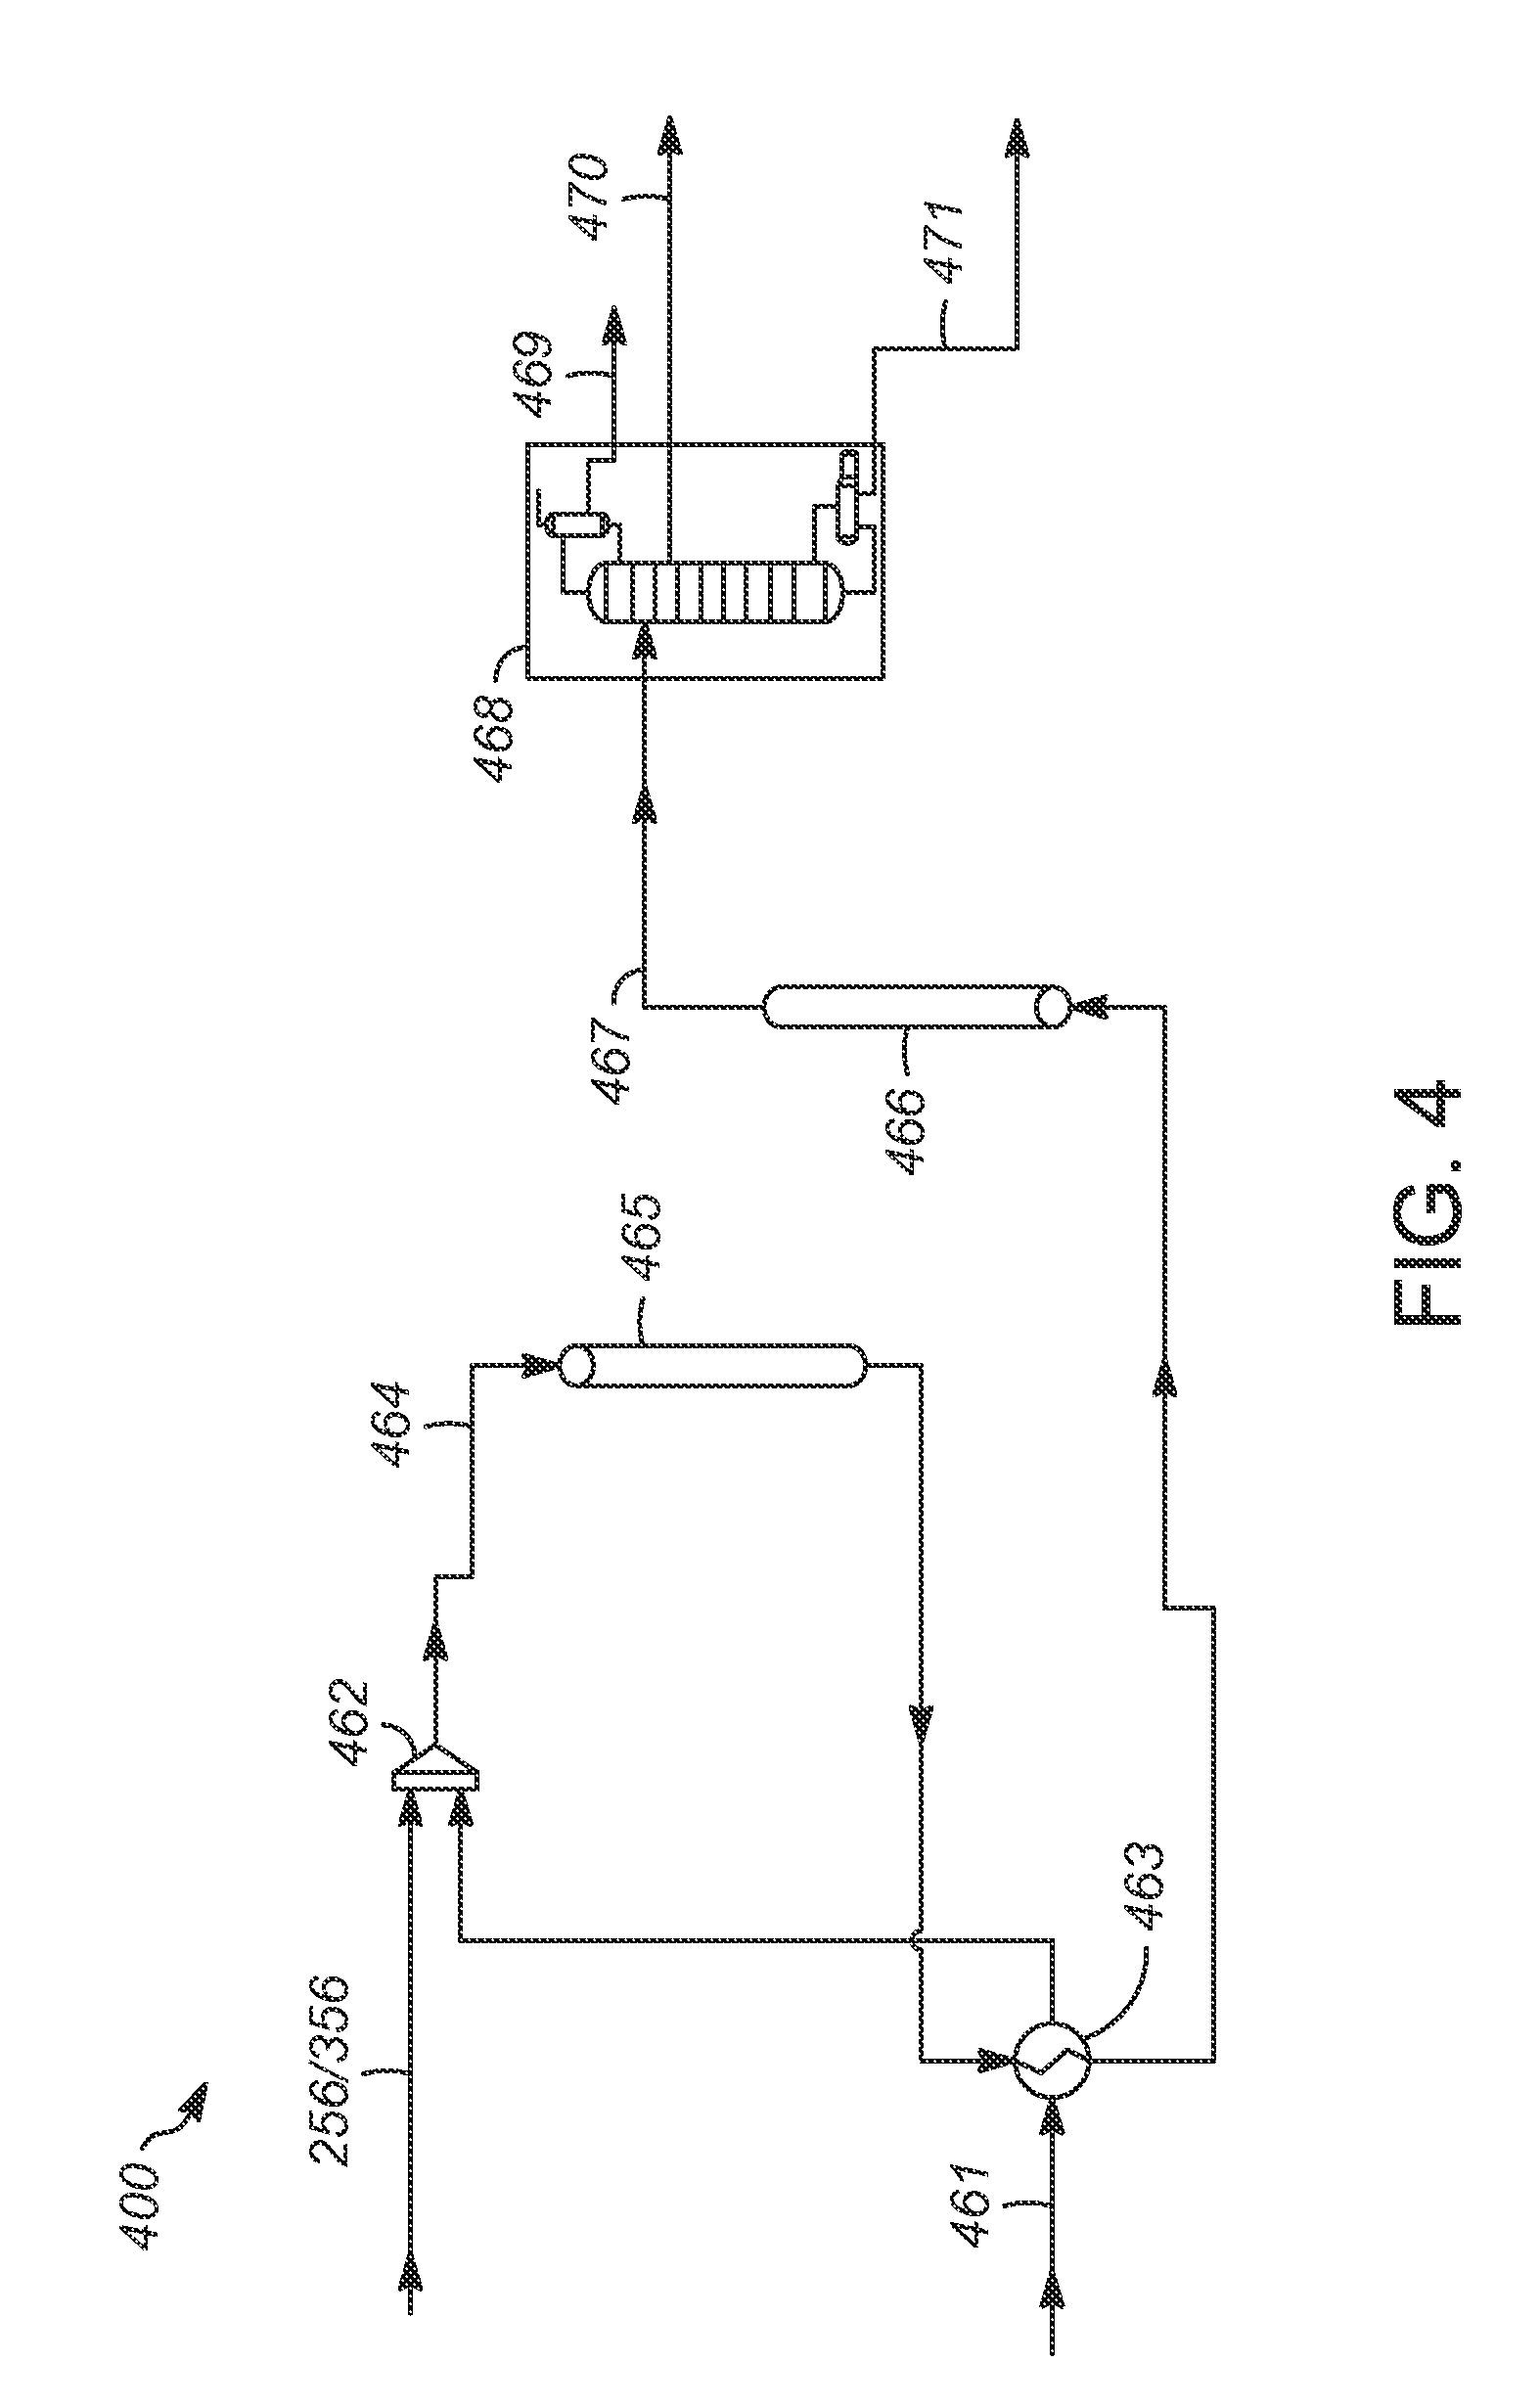 Transalkylation / disproportionation or thermal hydrodealkylation hydrocarbon processing methods and systems employing an increased ethylbenzene feed content